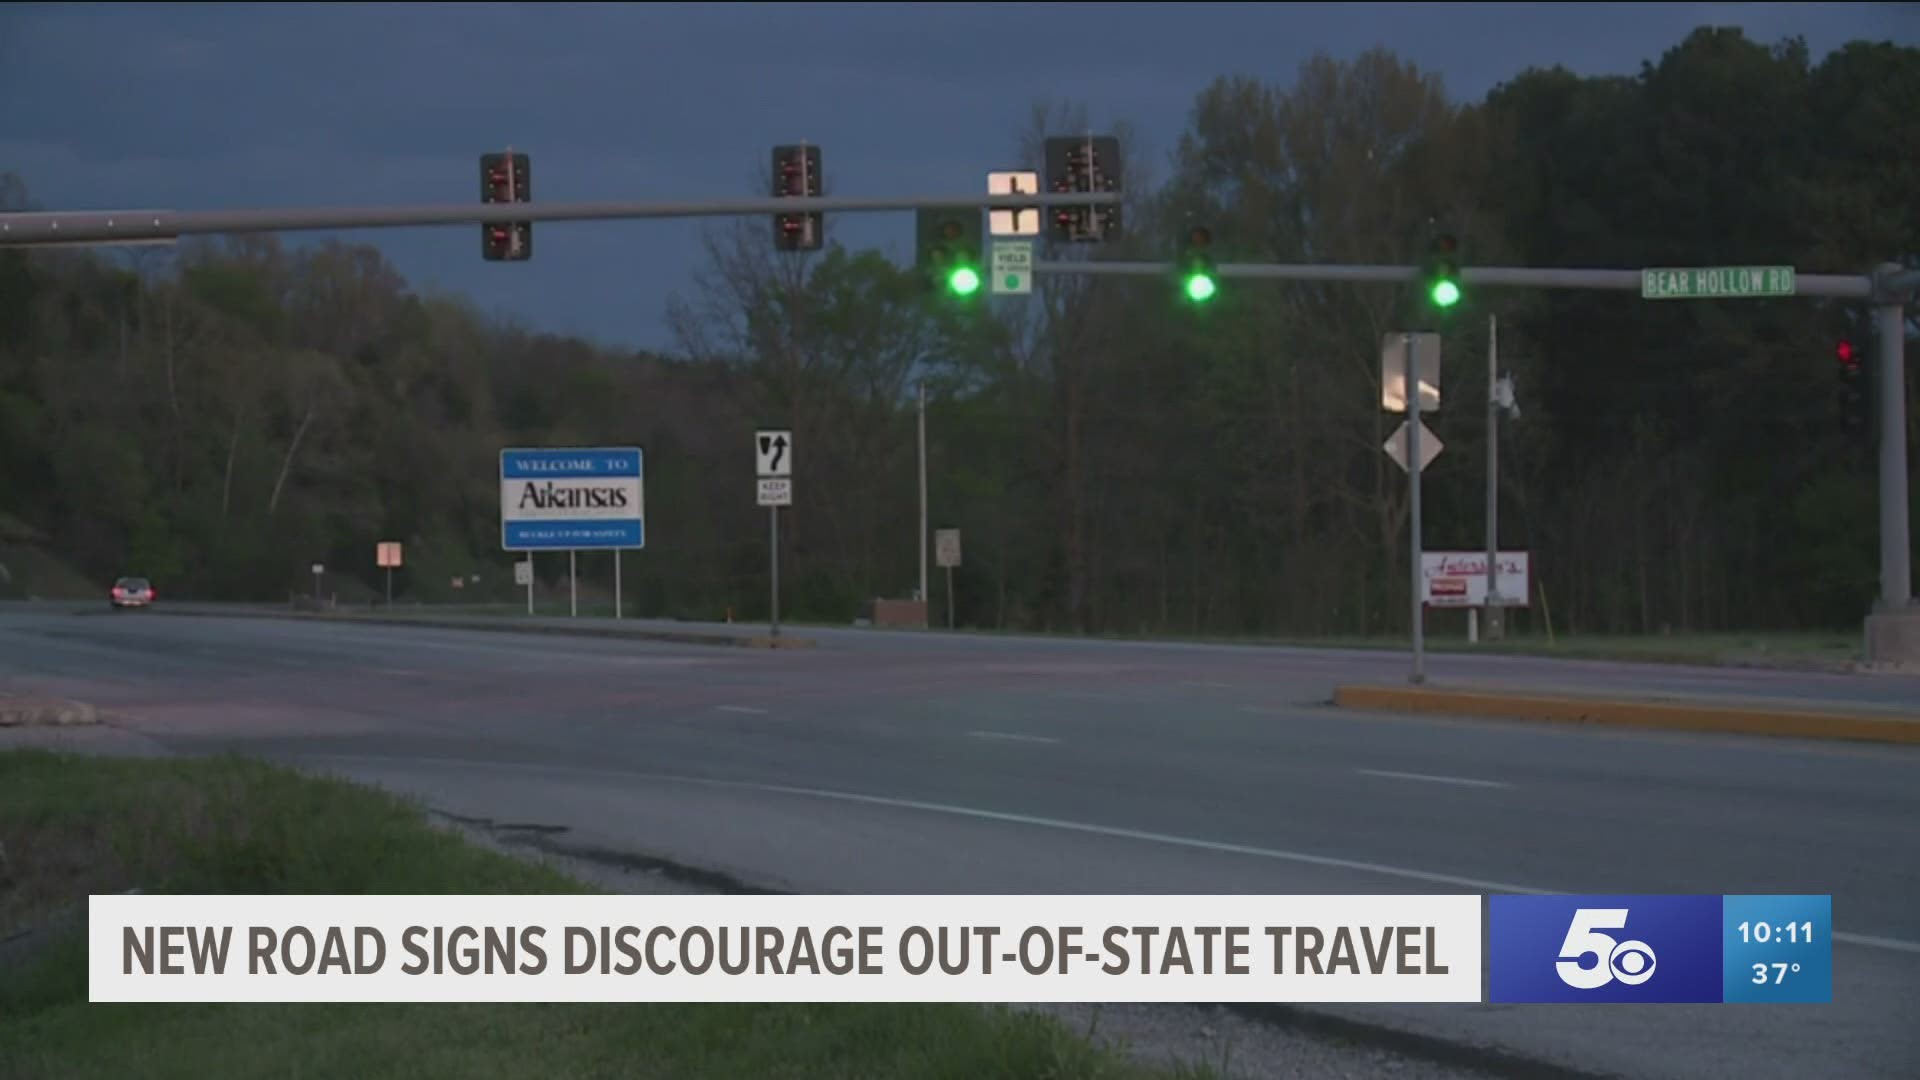 New road signs discourage out of state travel during coronavirus pandemic